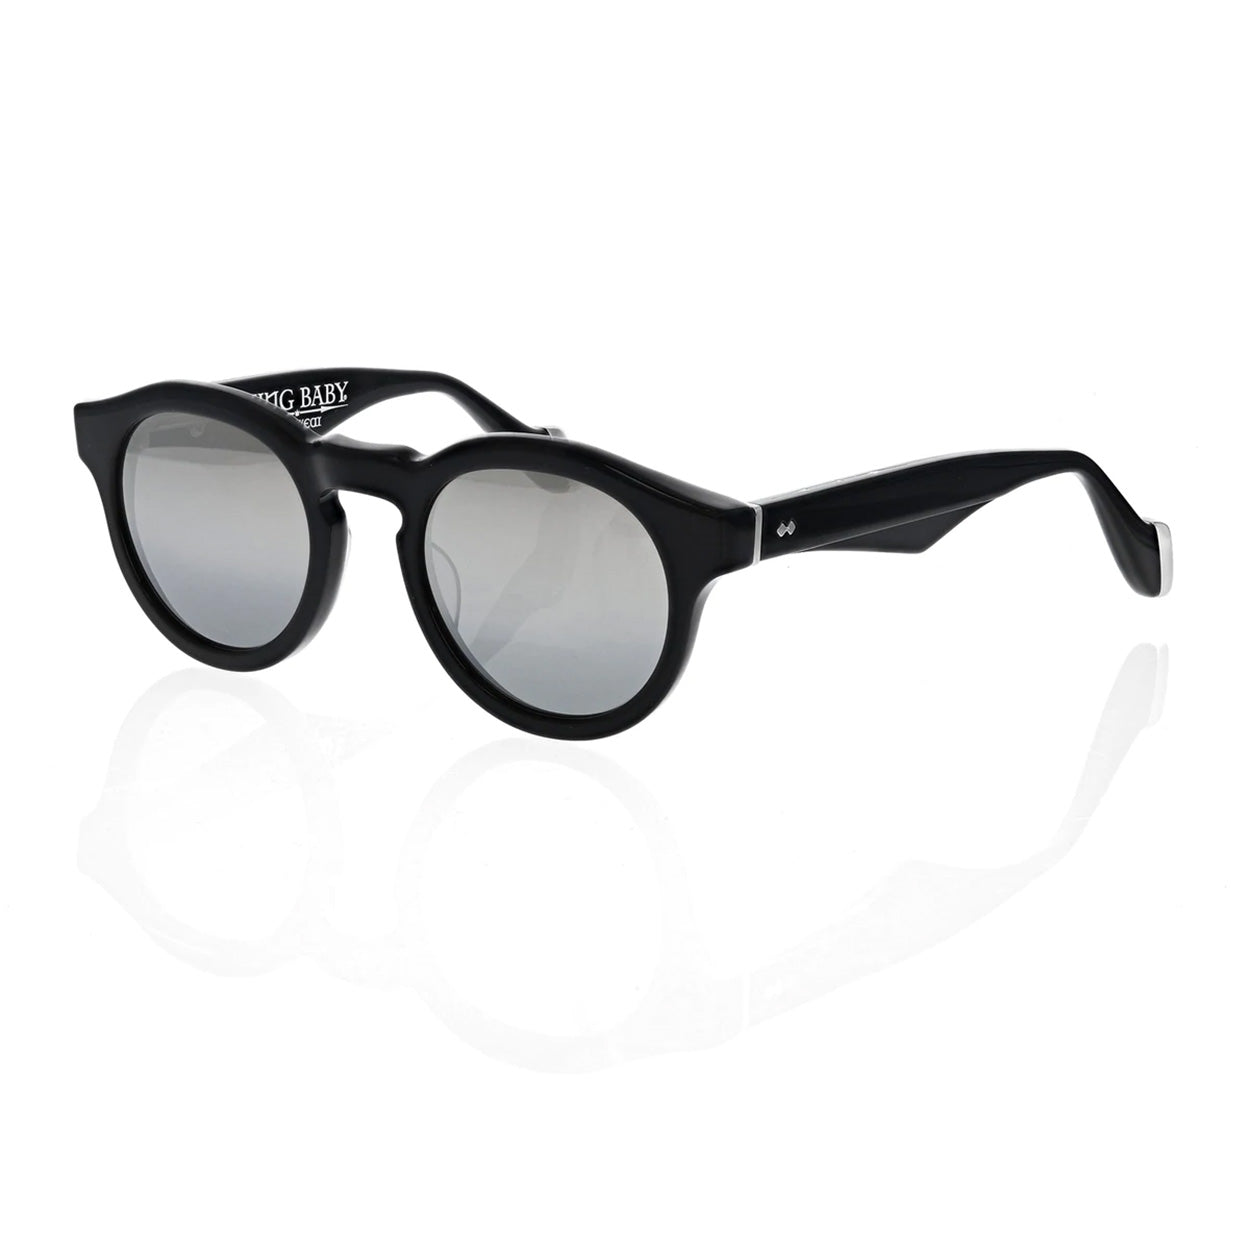 KING BABY - &quot;THE NASHVILLE&quot; Sunglasses in Black